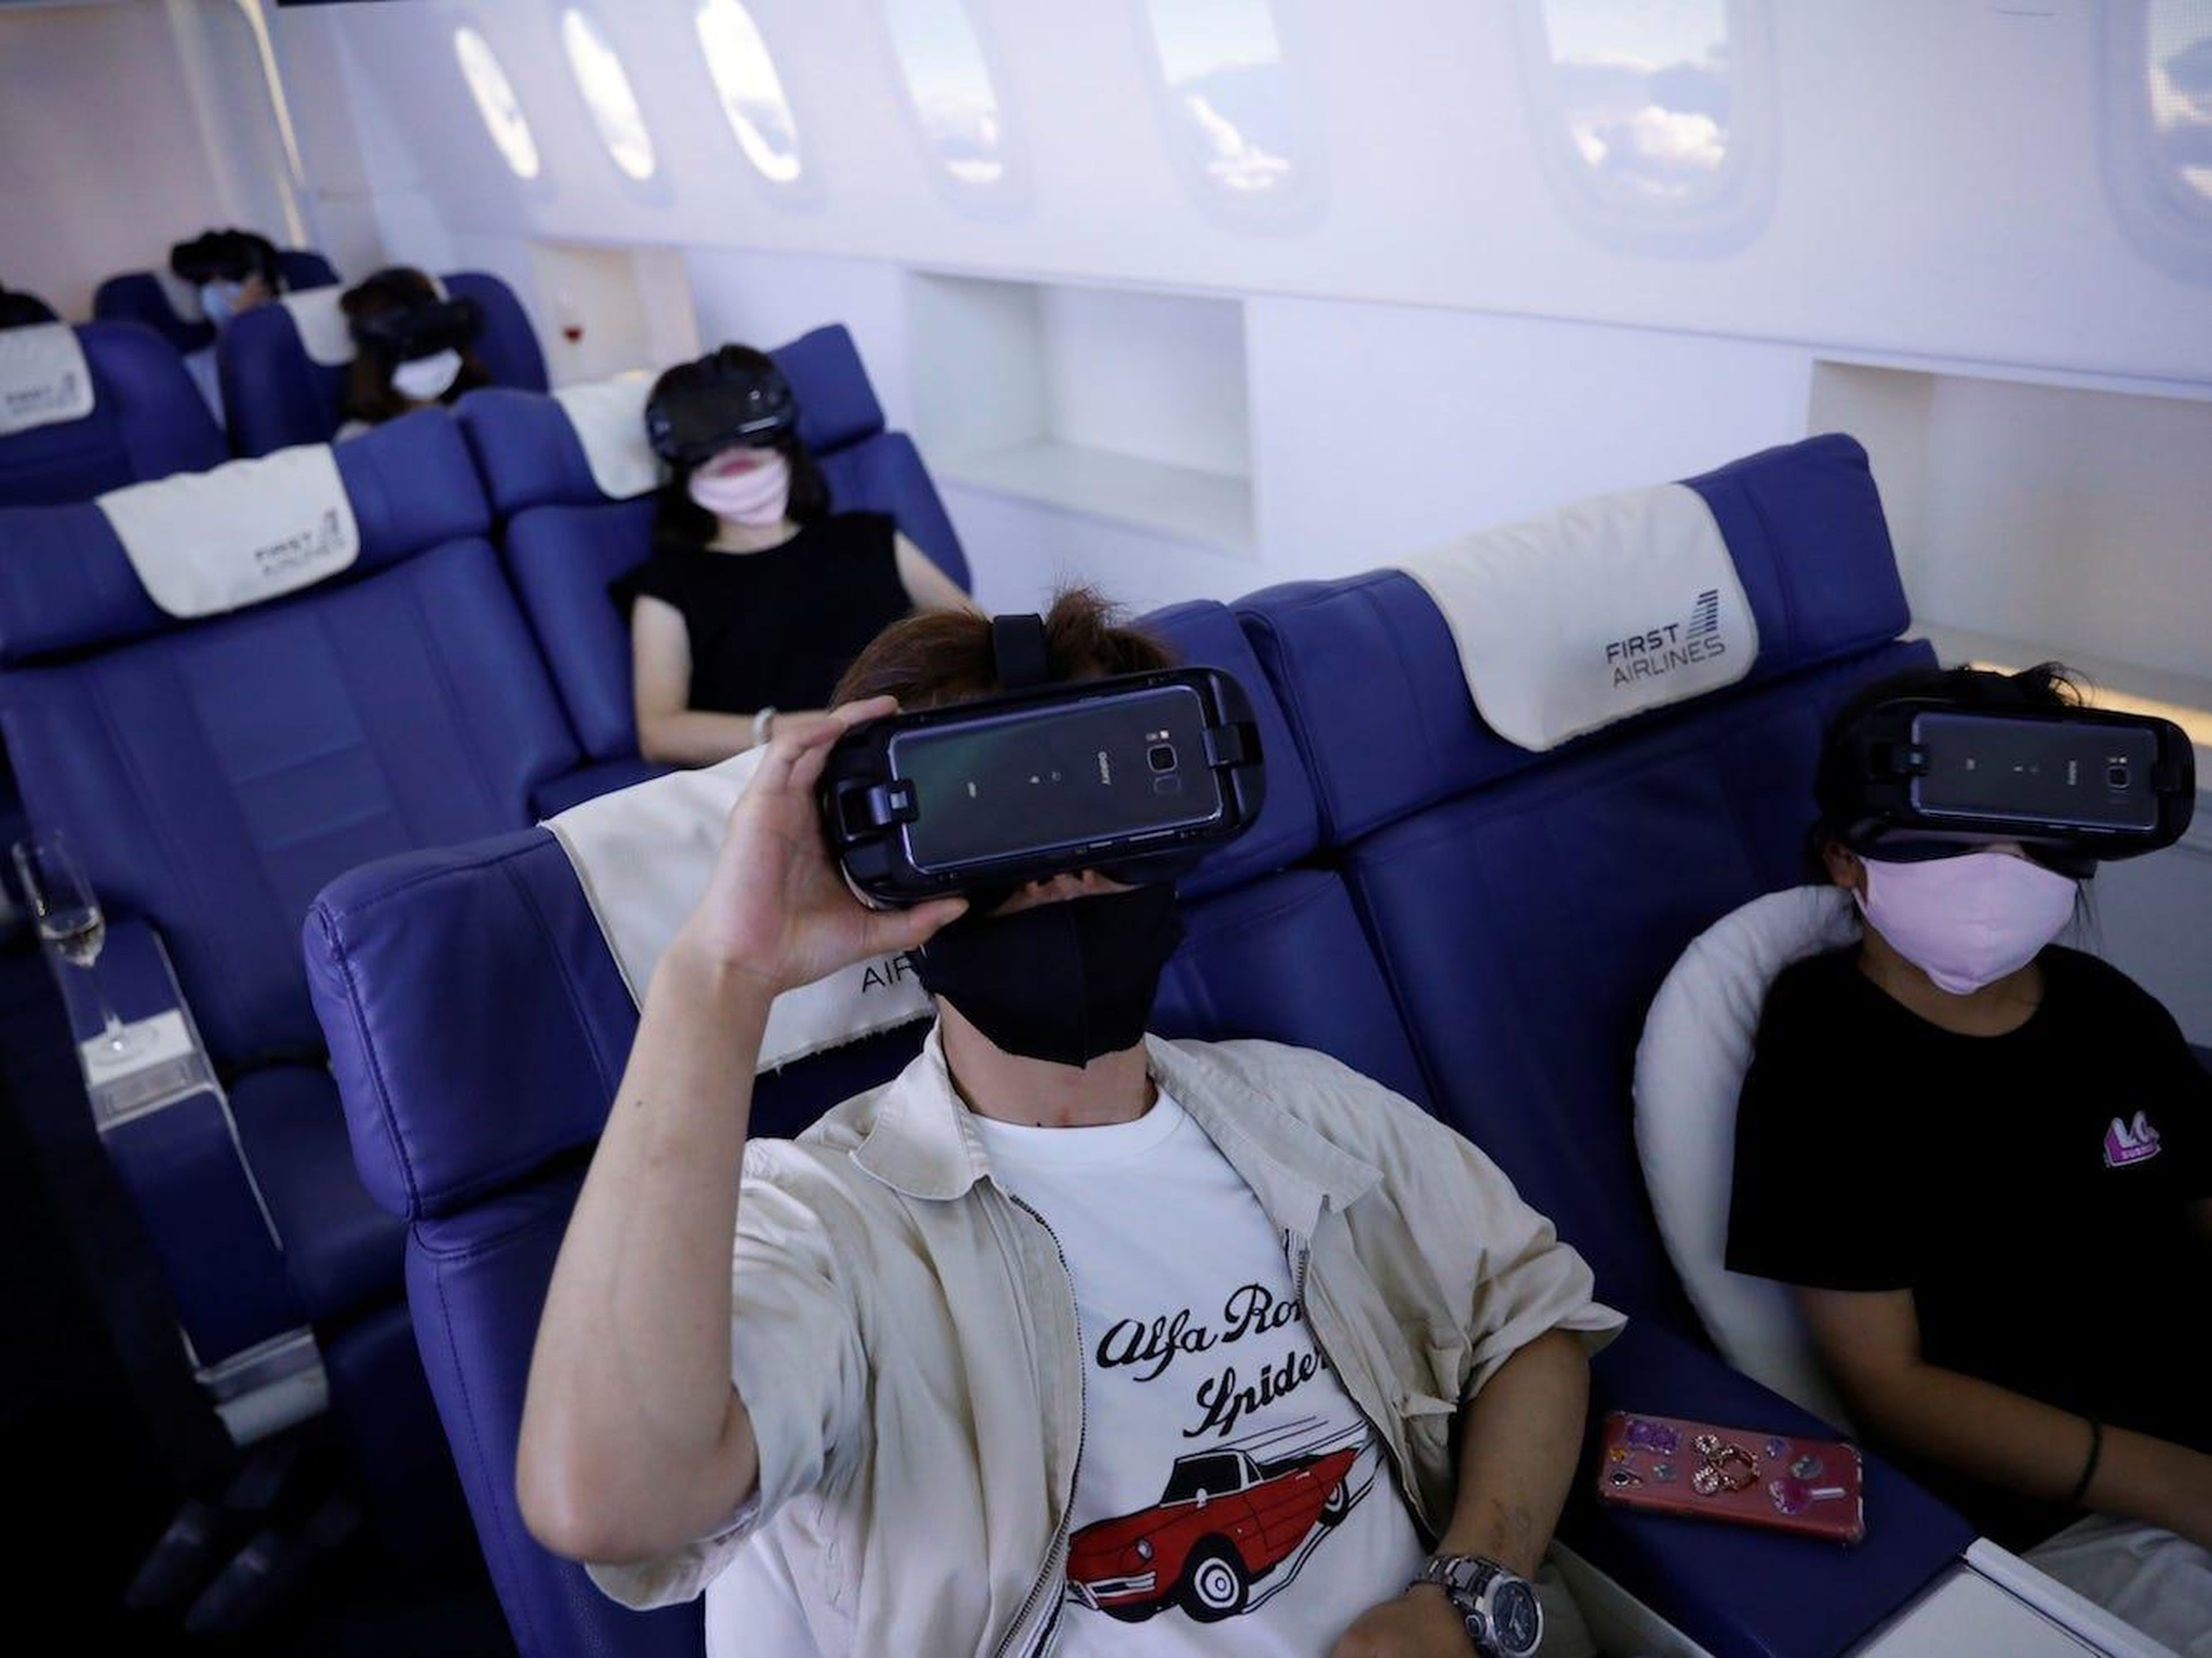 Customers in flight seats use virtual reality (VR) devices at First Airlines, that provides VR flight experiences, including 360-degree tours of cities and meals in Tokyo, Japan, on August 12, 2020. Kim Kyung-Hoon/Reuters